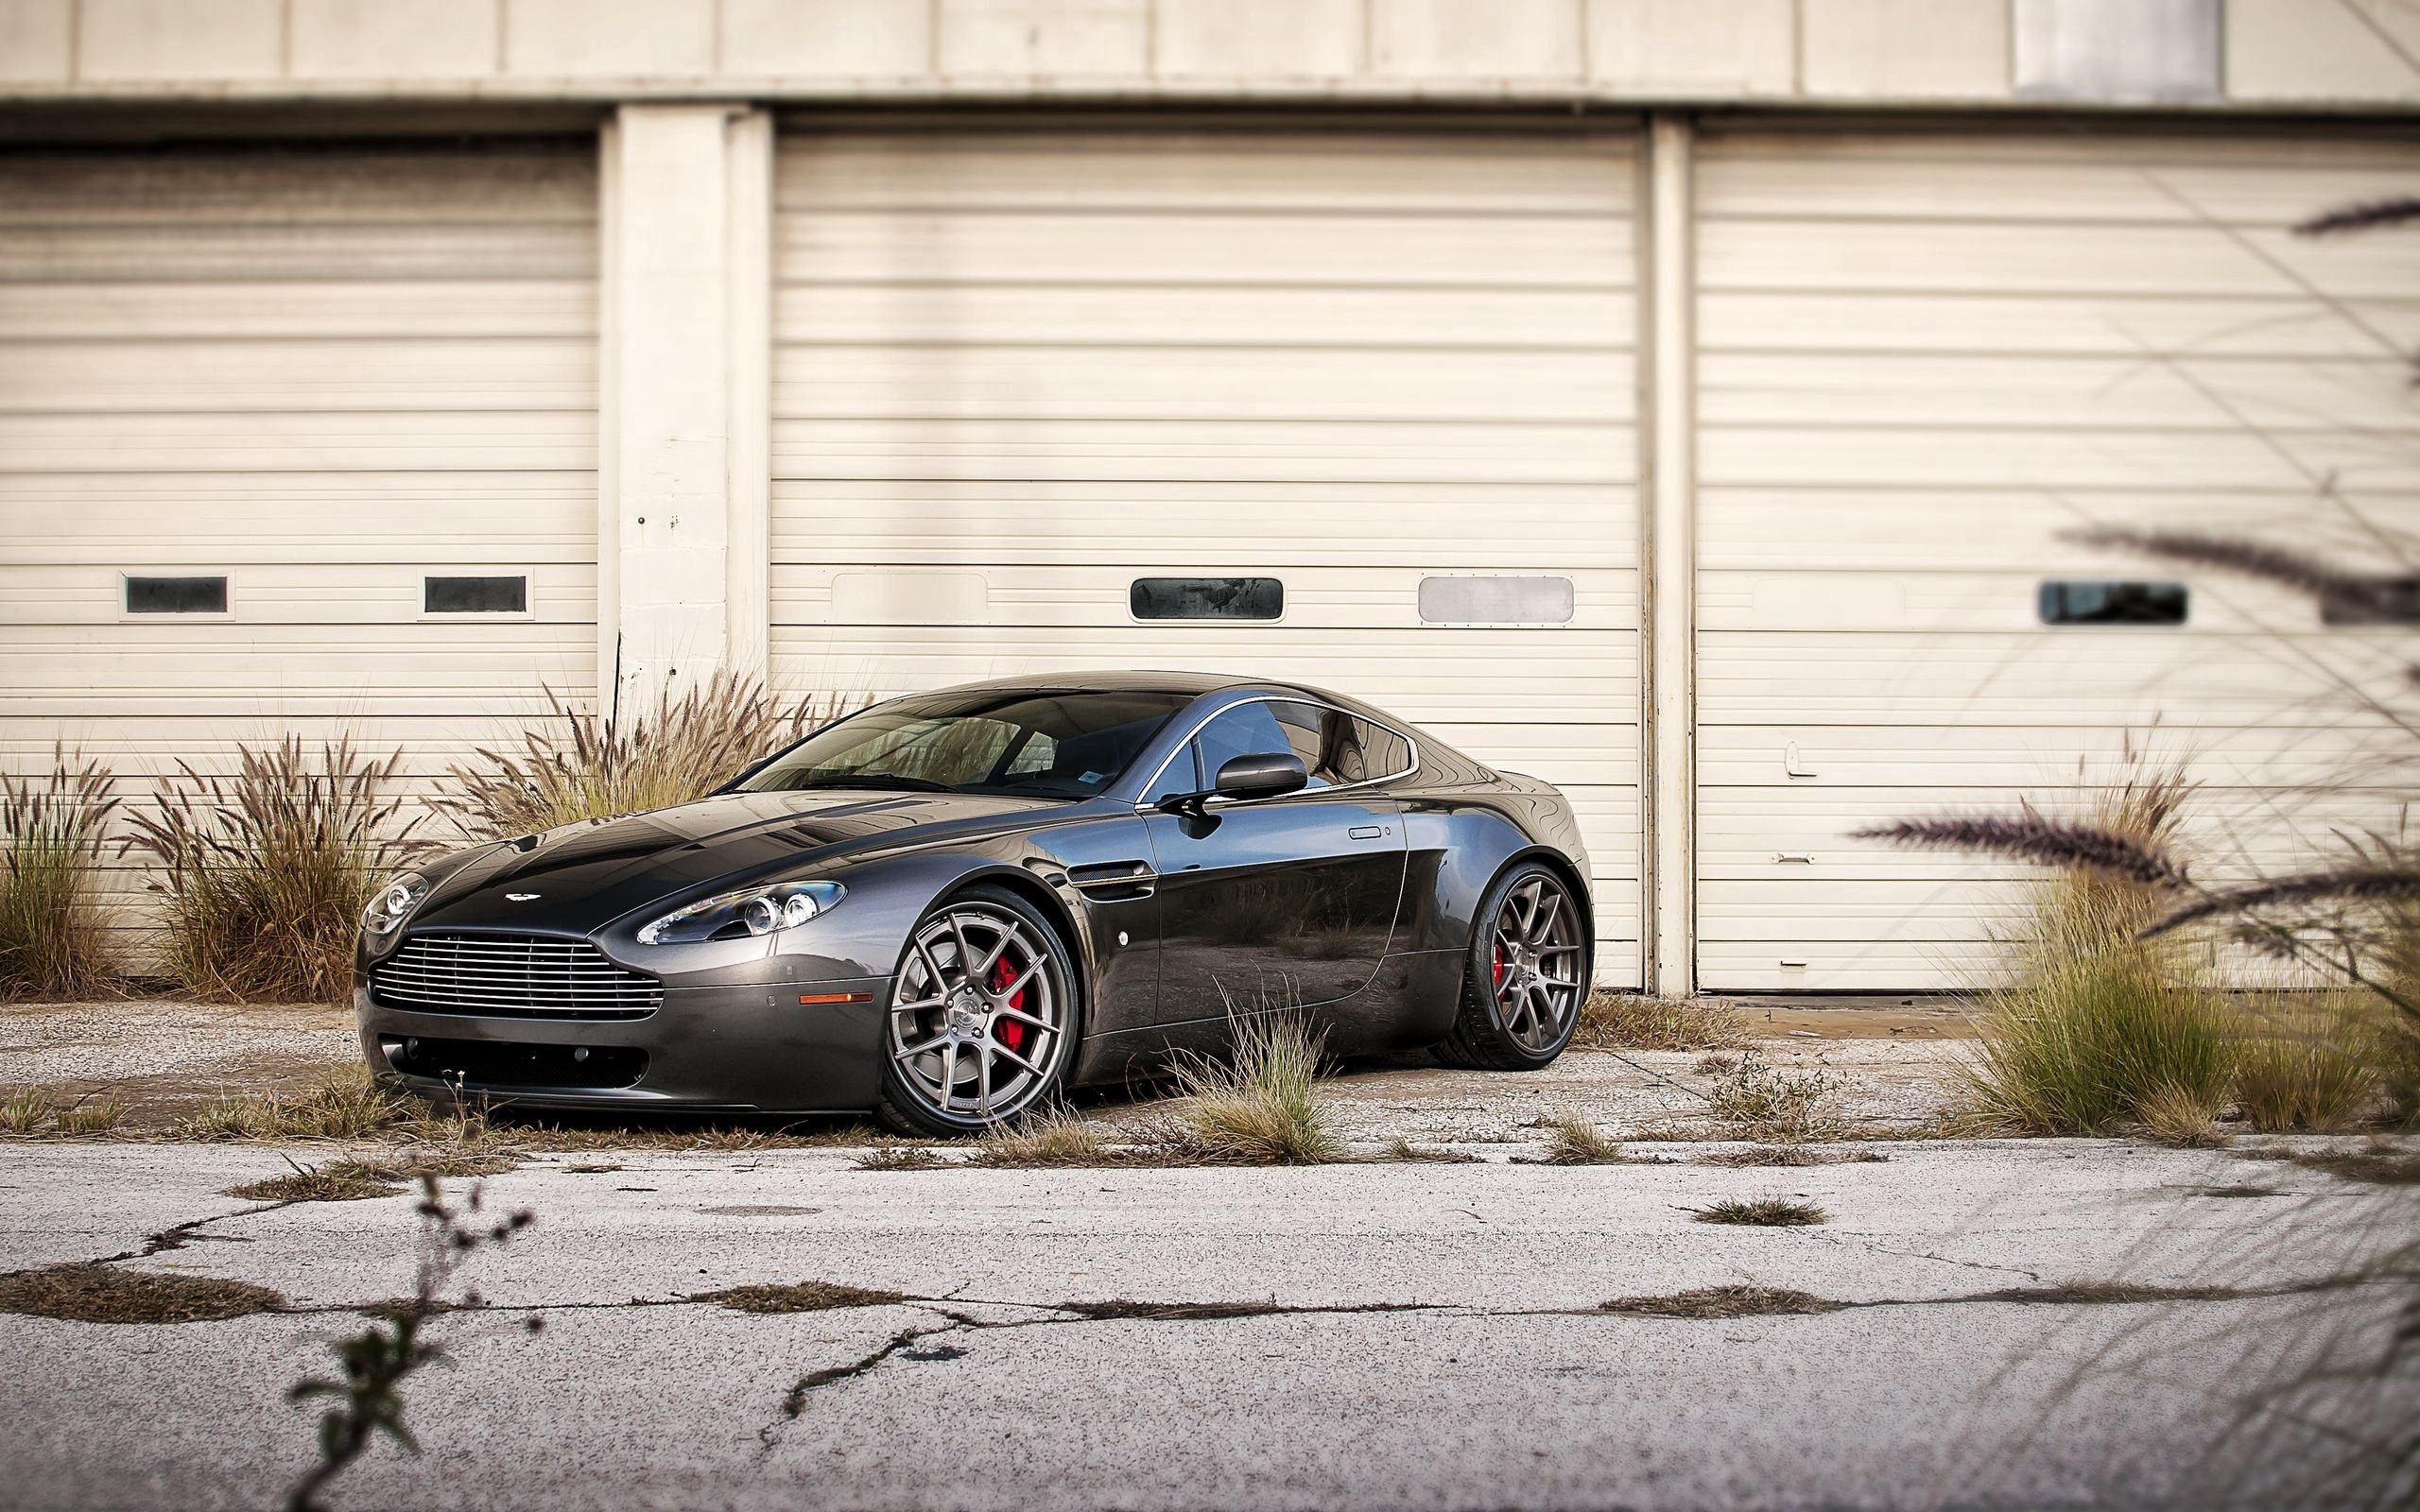 Wallpaper for mobile devices cars, vantage, aston martin